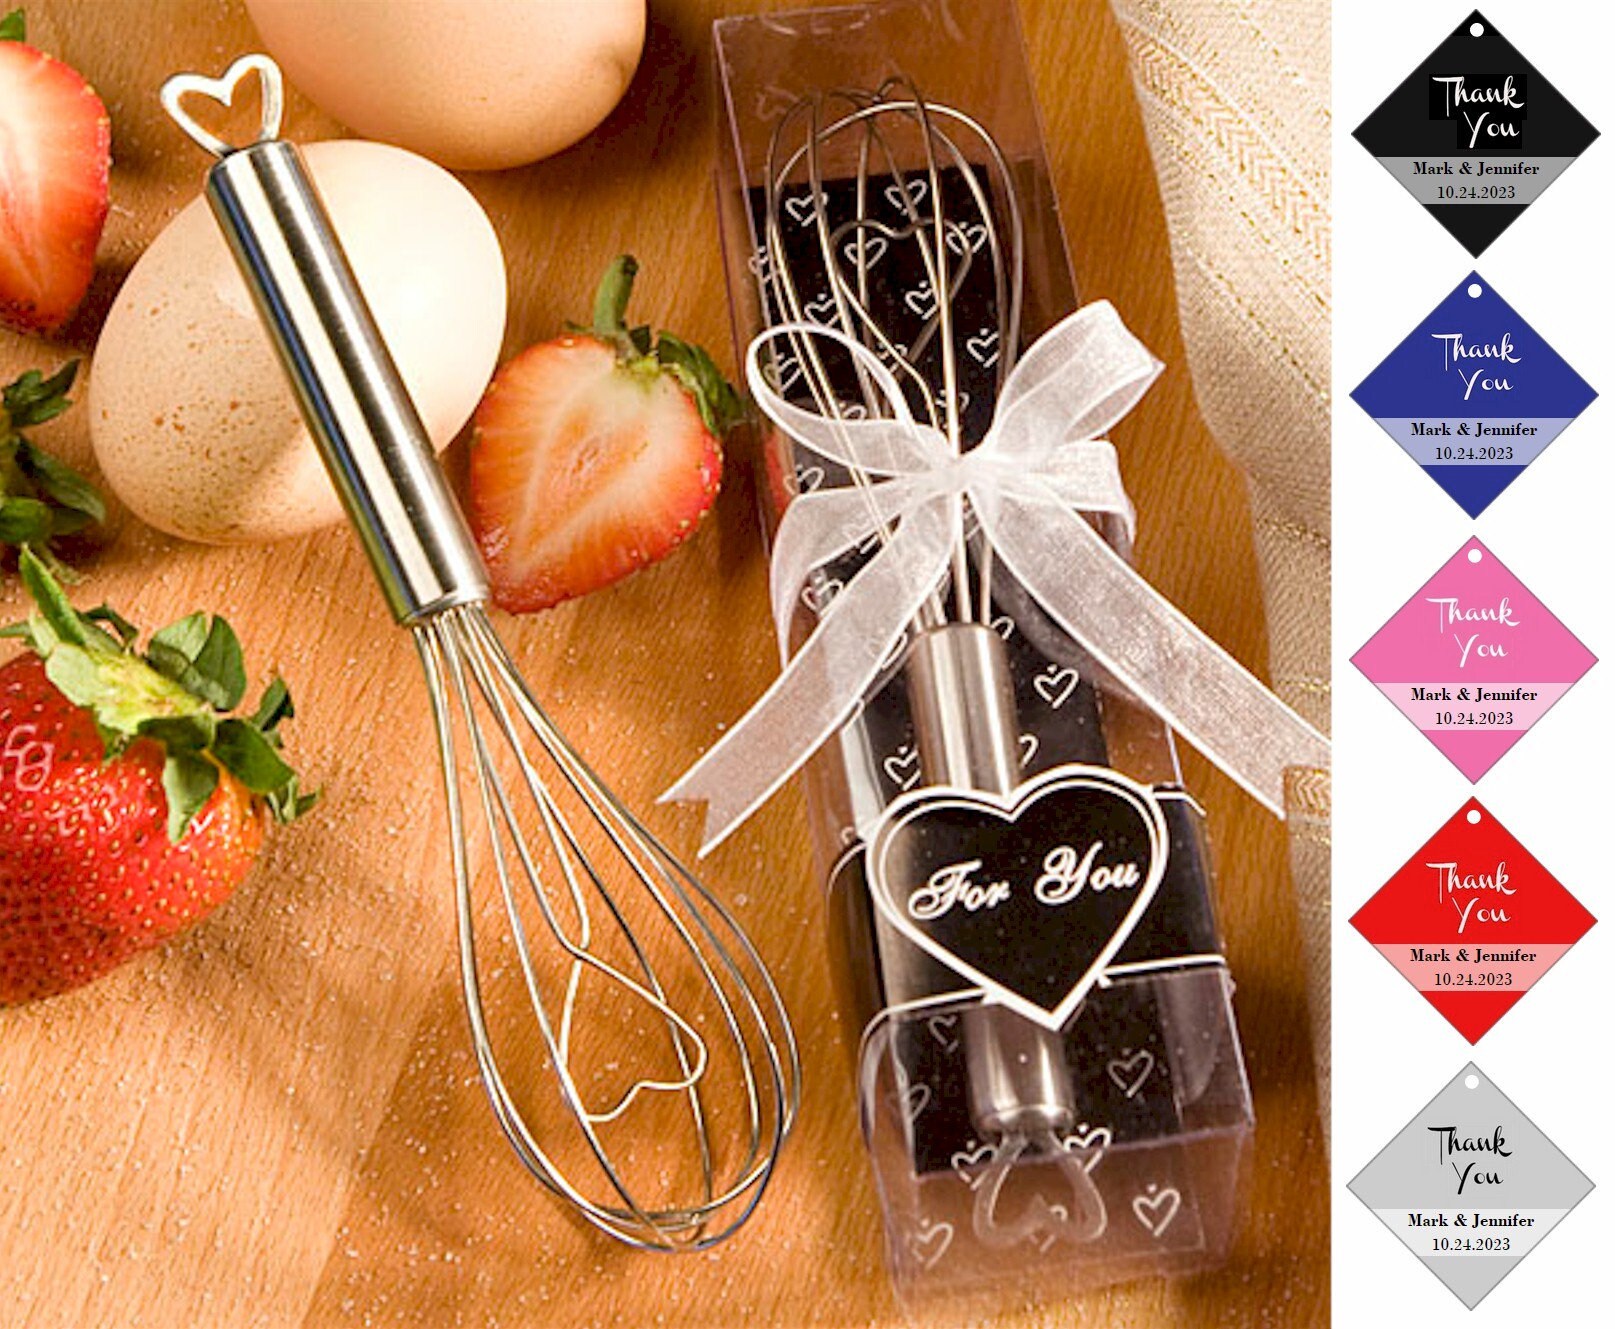 Wholesale Wedding Favors, Party Favors, by Event Blossom Heart Shaped  Handle Whisks